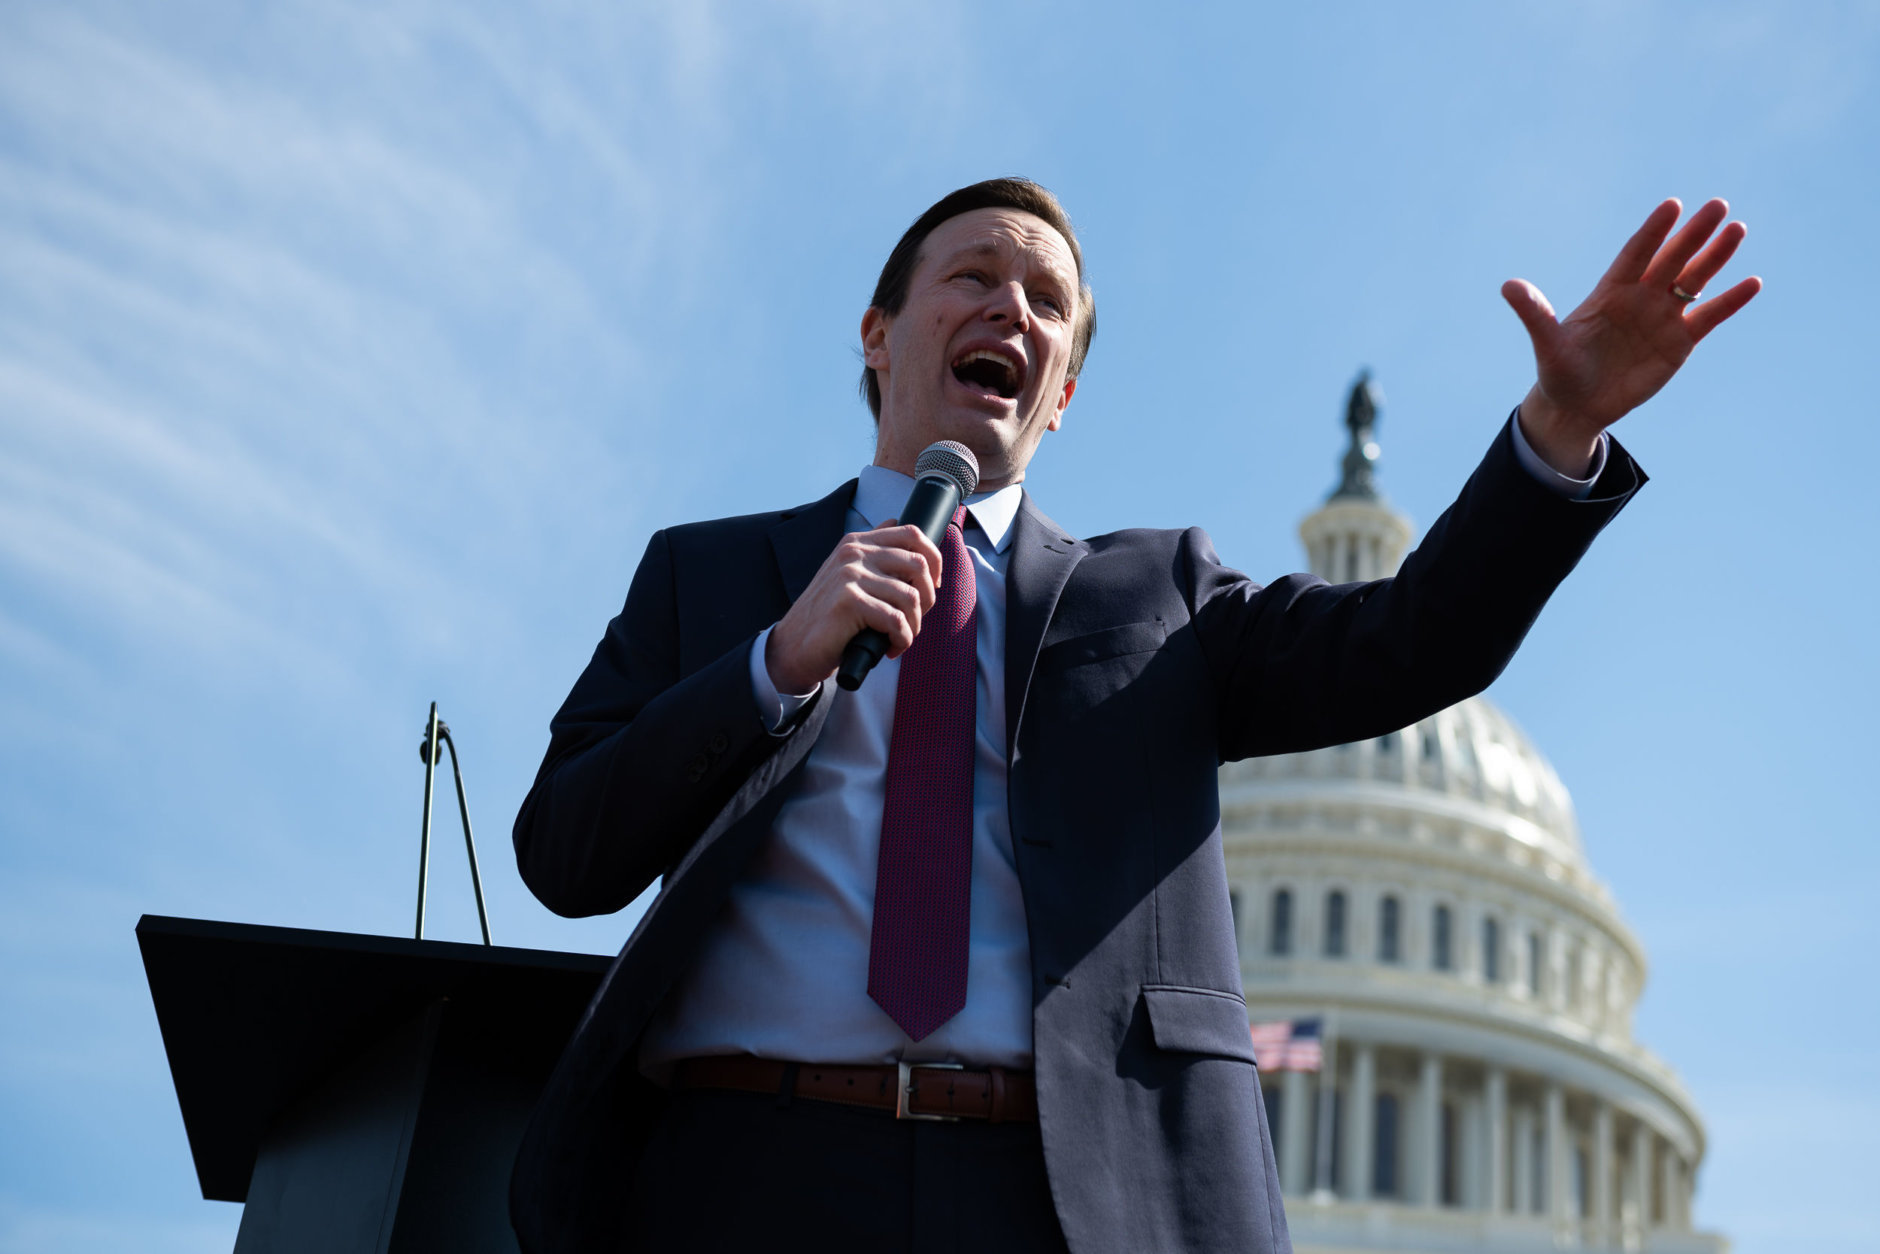 Connecticut Sen. Chris Murphy addresses students in the shadow of the Capitol rotunda on Thursday afternoon. As the junior Senator from Connecticut, Murphy took office in the year following the Sandy Hook shooting.(WTOP/Alejandro Alvarez)